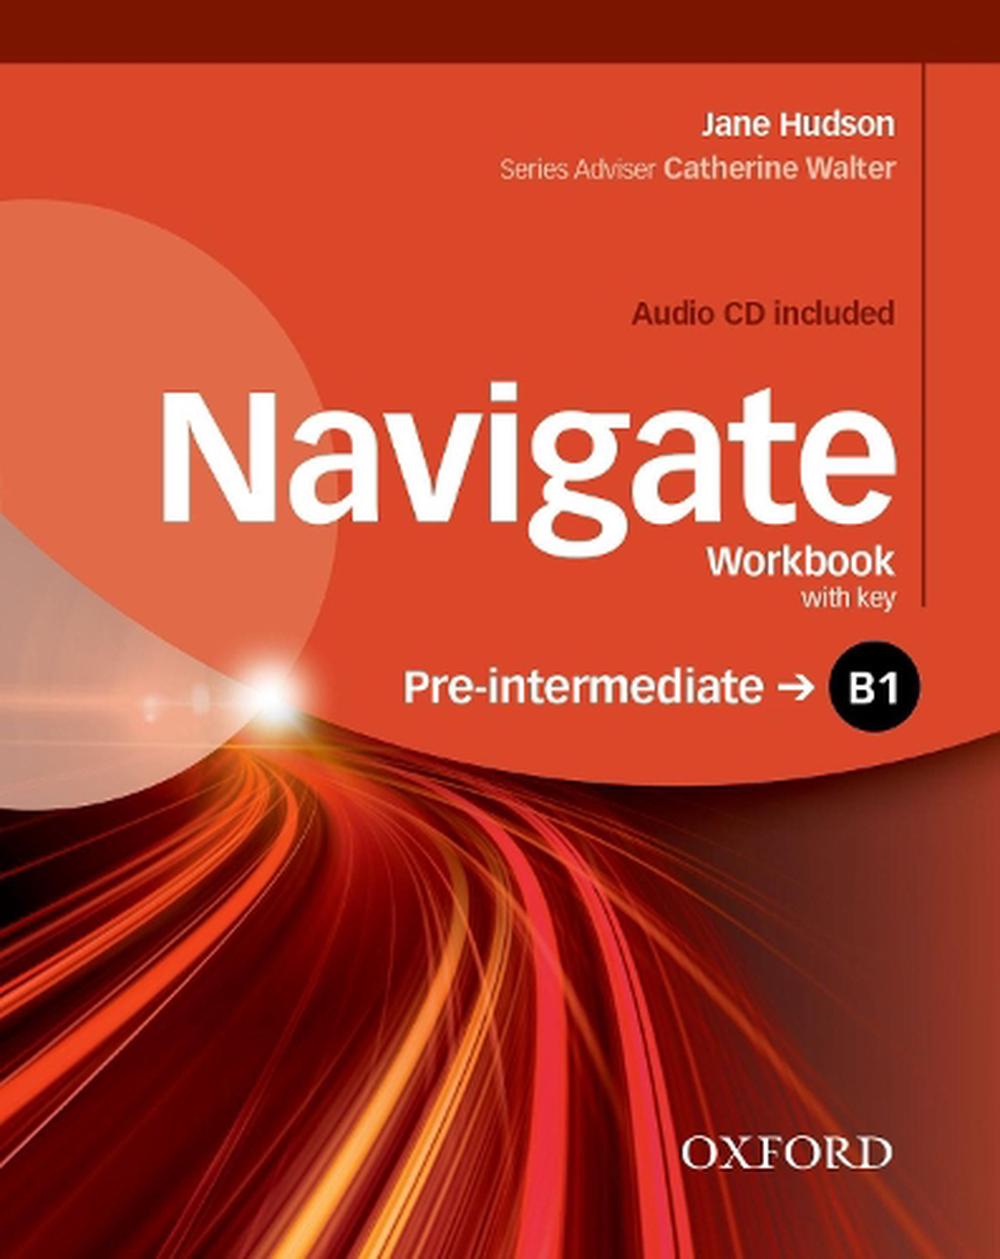 by　The　Pre-Intermediate:　Workbook　at　Navigate:　Buy　online　CD　9780194566537　Merchandise,　(with　B1　Book　Hudson,　Jane　key)　with　Nile